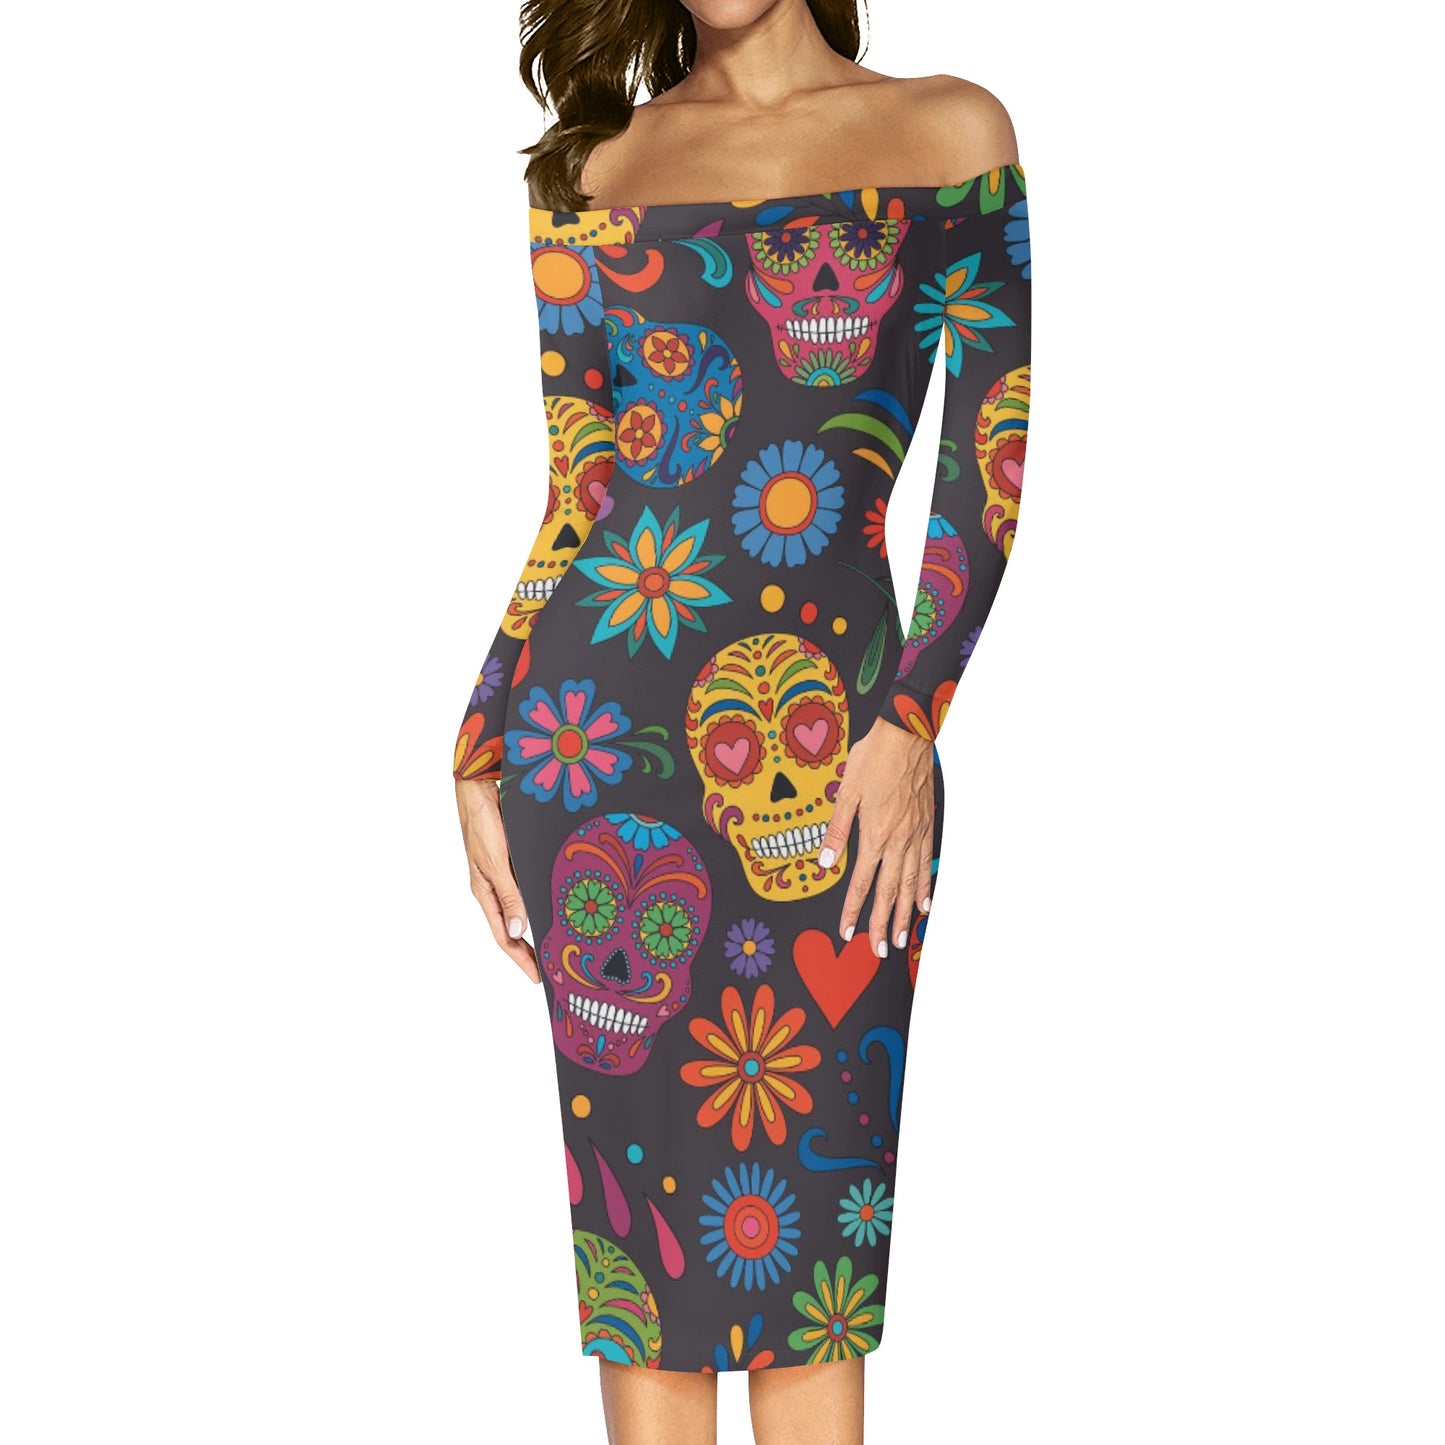 Sugar skull Day of the dead Mexican skull Women's Long Sleeve Off The Shoulder Lady Dress